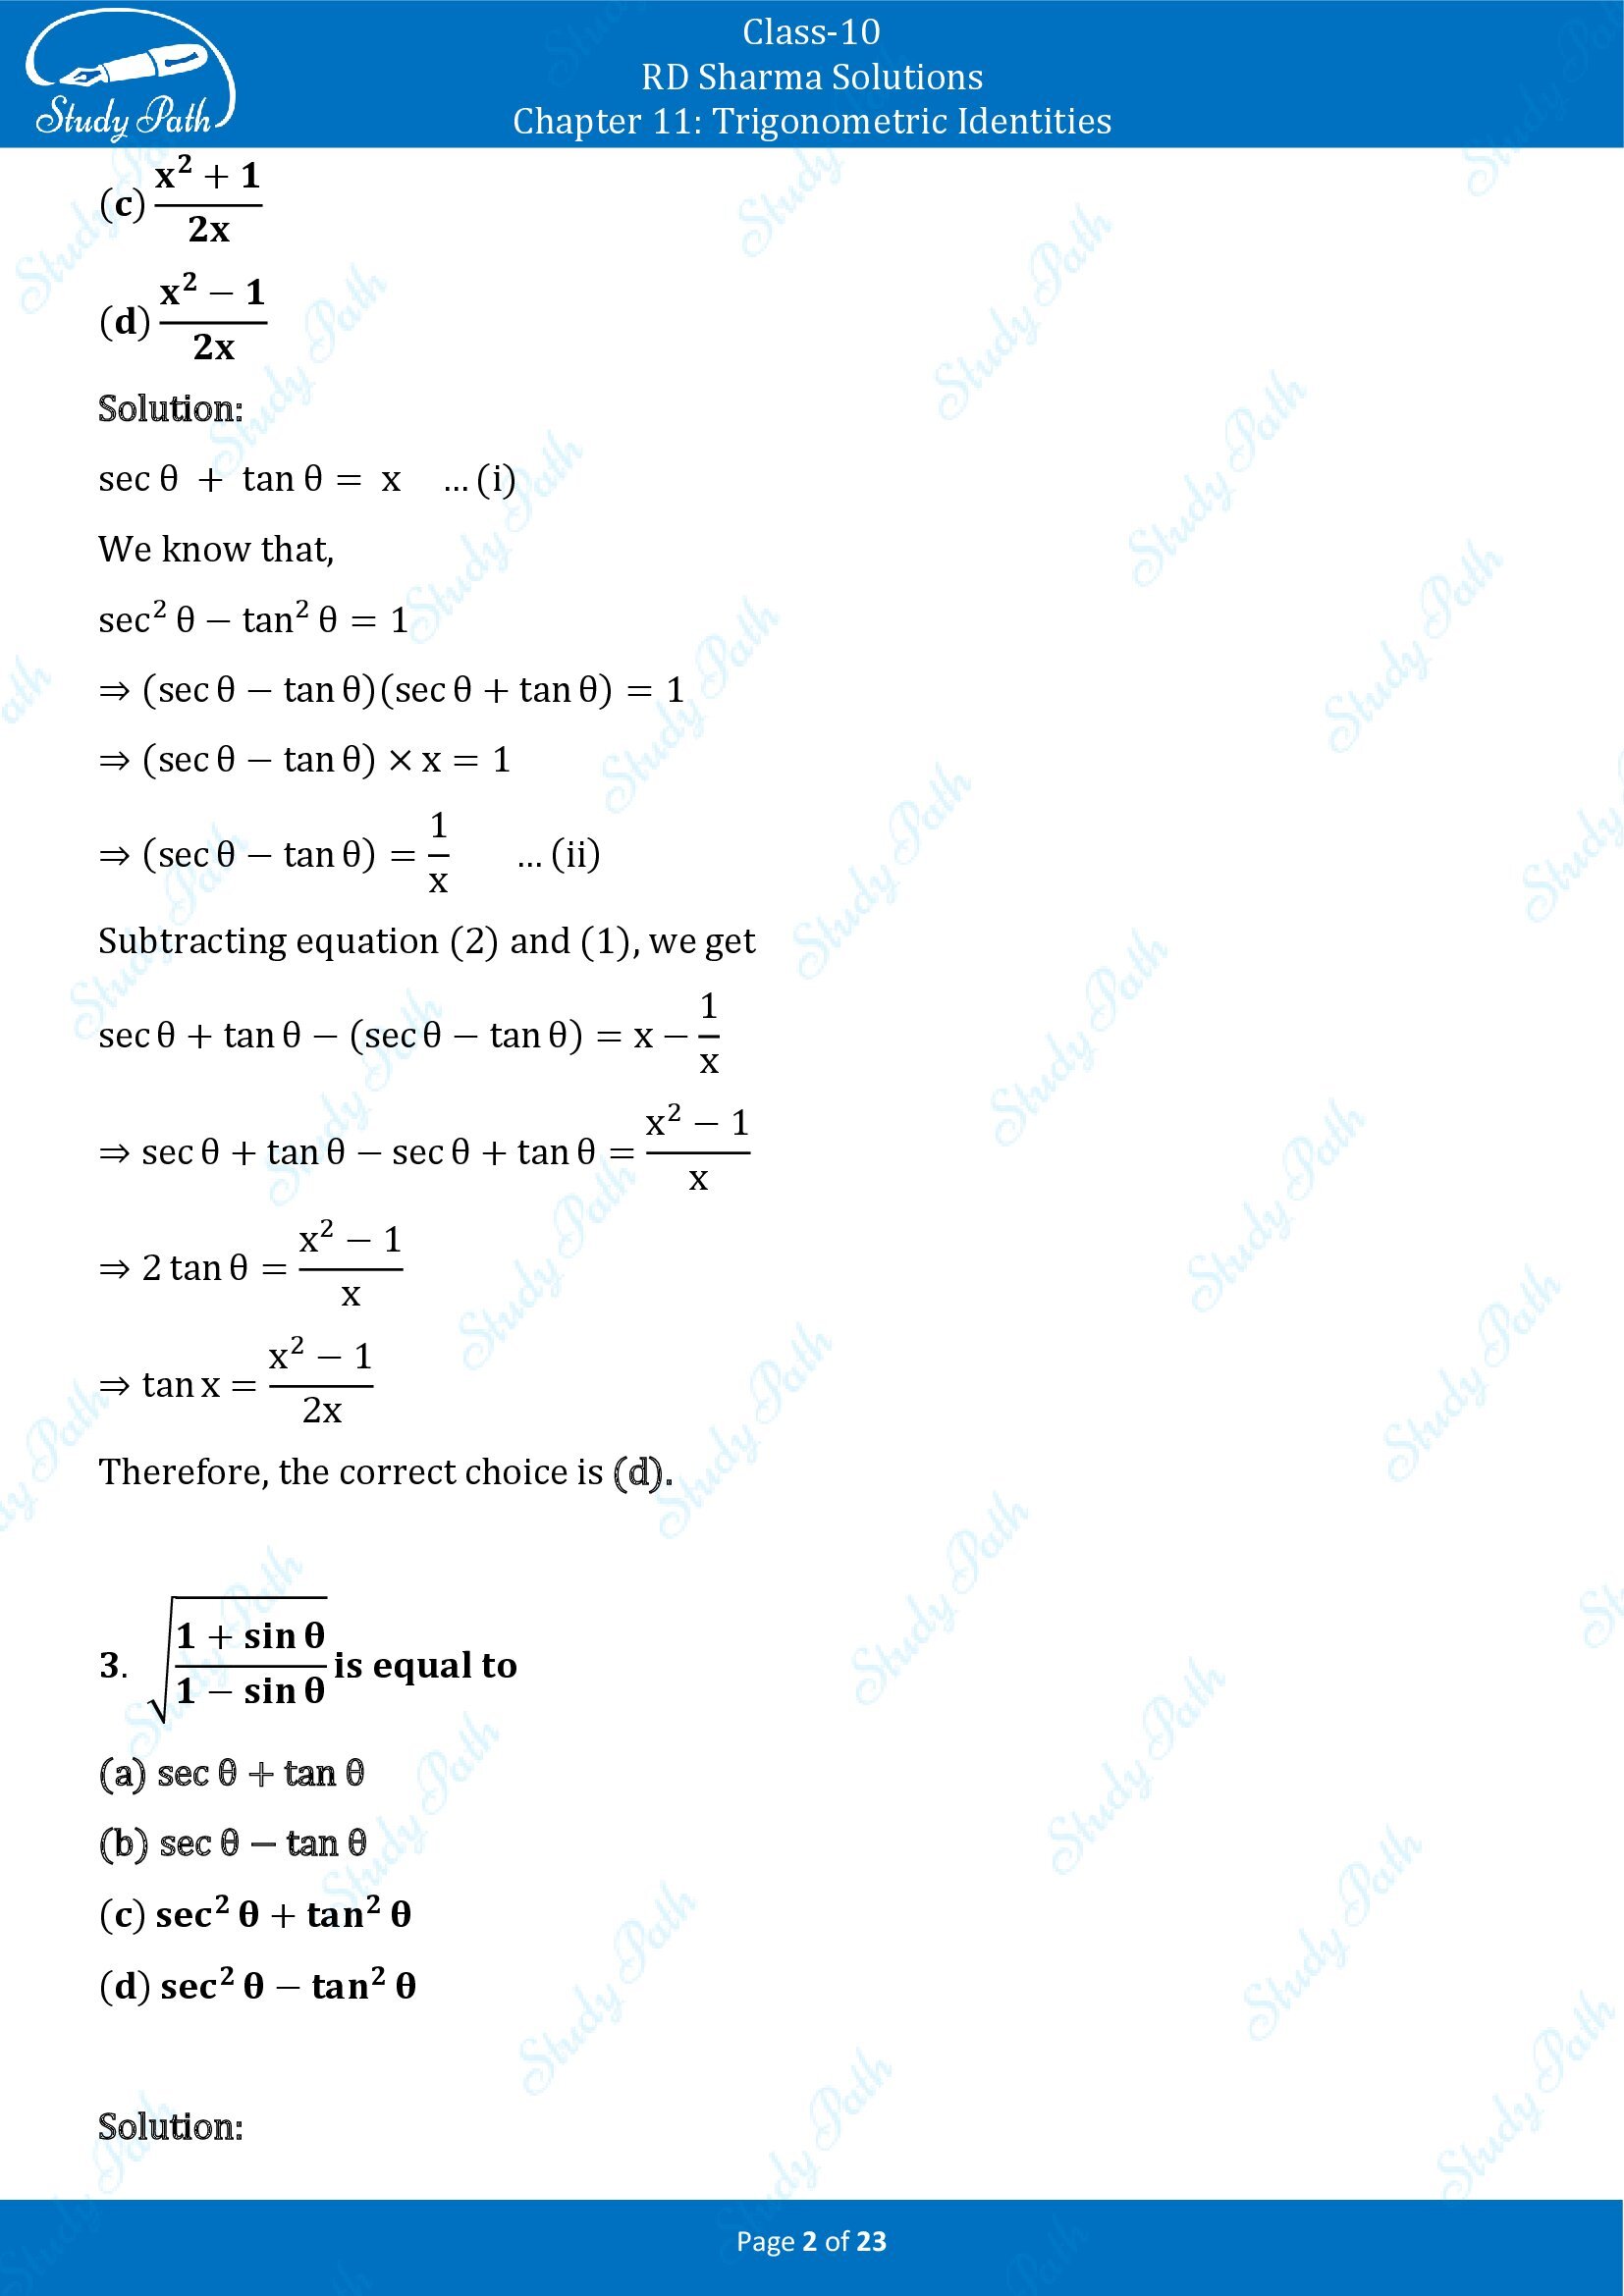 RD Sharma Solutions Class 10 Chapter 11 Trigonometric Identities Multiple Choice Questions MCQs 00002